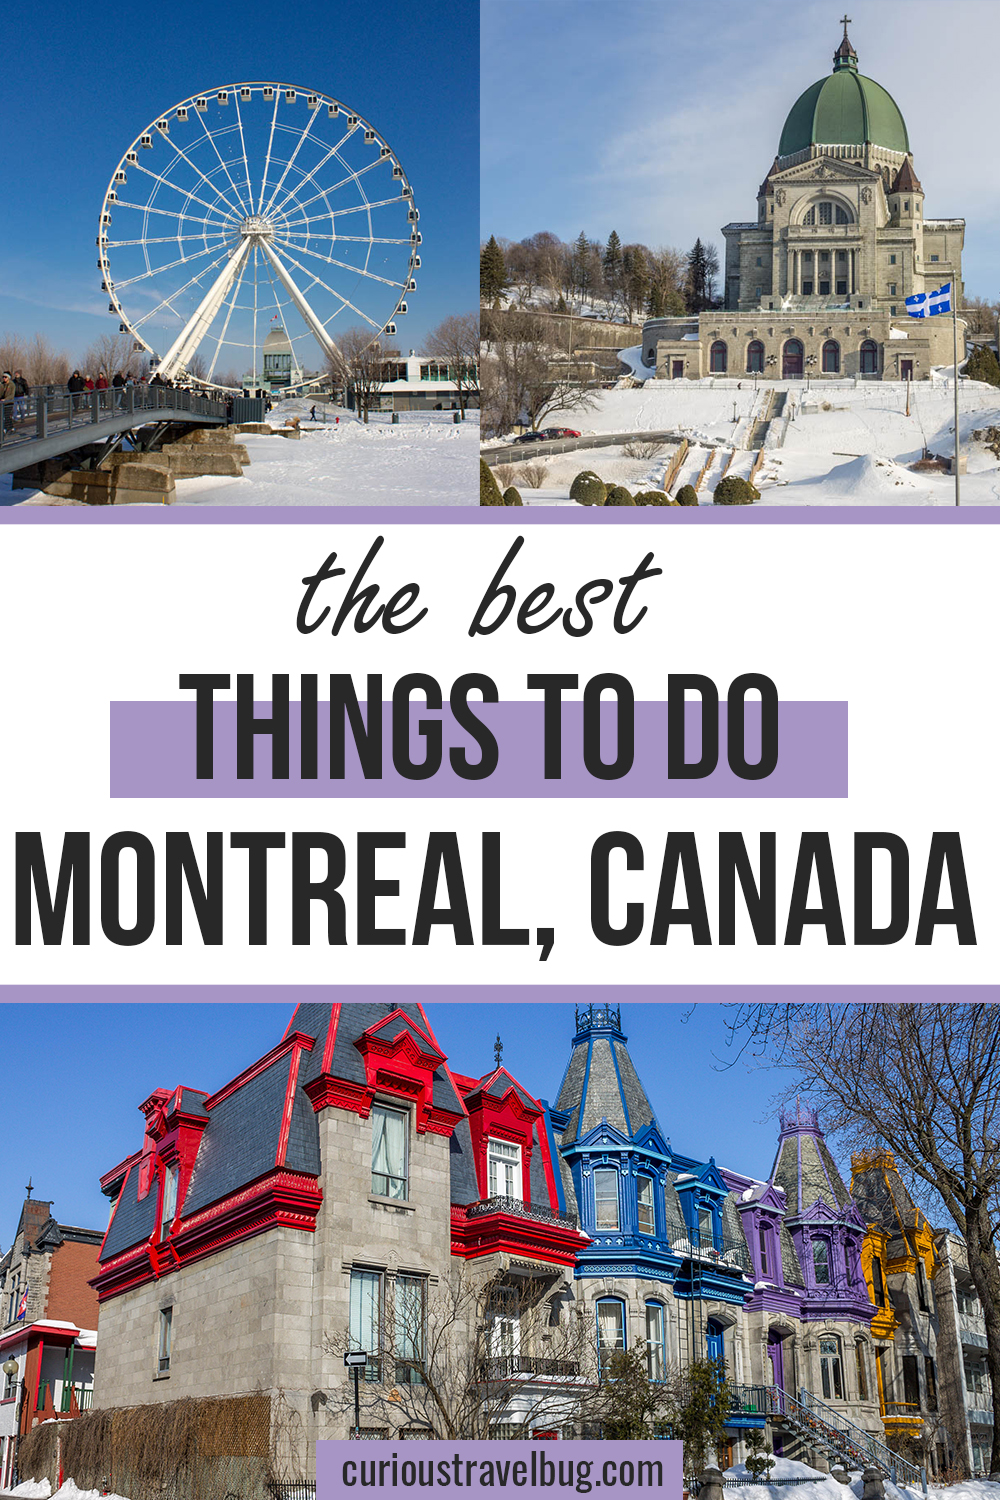 The very best of Montreal including the beautiful Place Saint Louise, the ferris wheel, and the gorgeous basilica St.Joseph's Oratory. Montreal has a lot to offer visitors and this includes where to stay, what to eat, and the best things to do in Montreal if you have three days as well as day trip options like the Laurentians, Mont Tremblant and Quebec City.